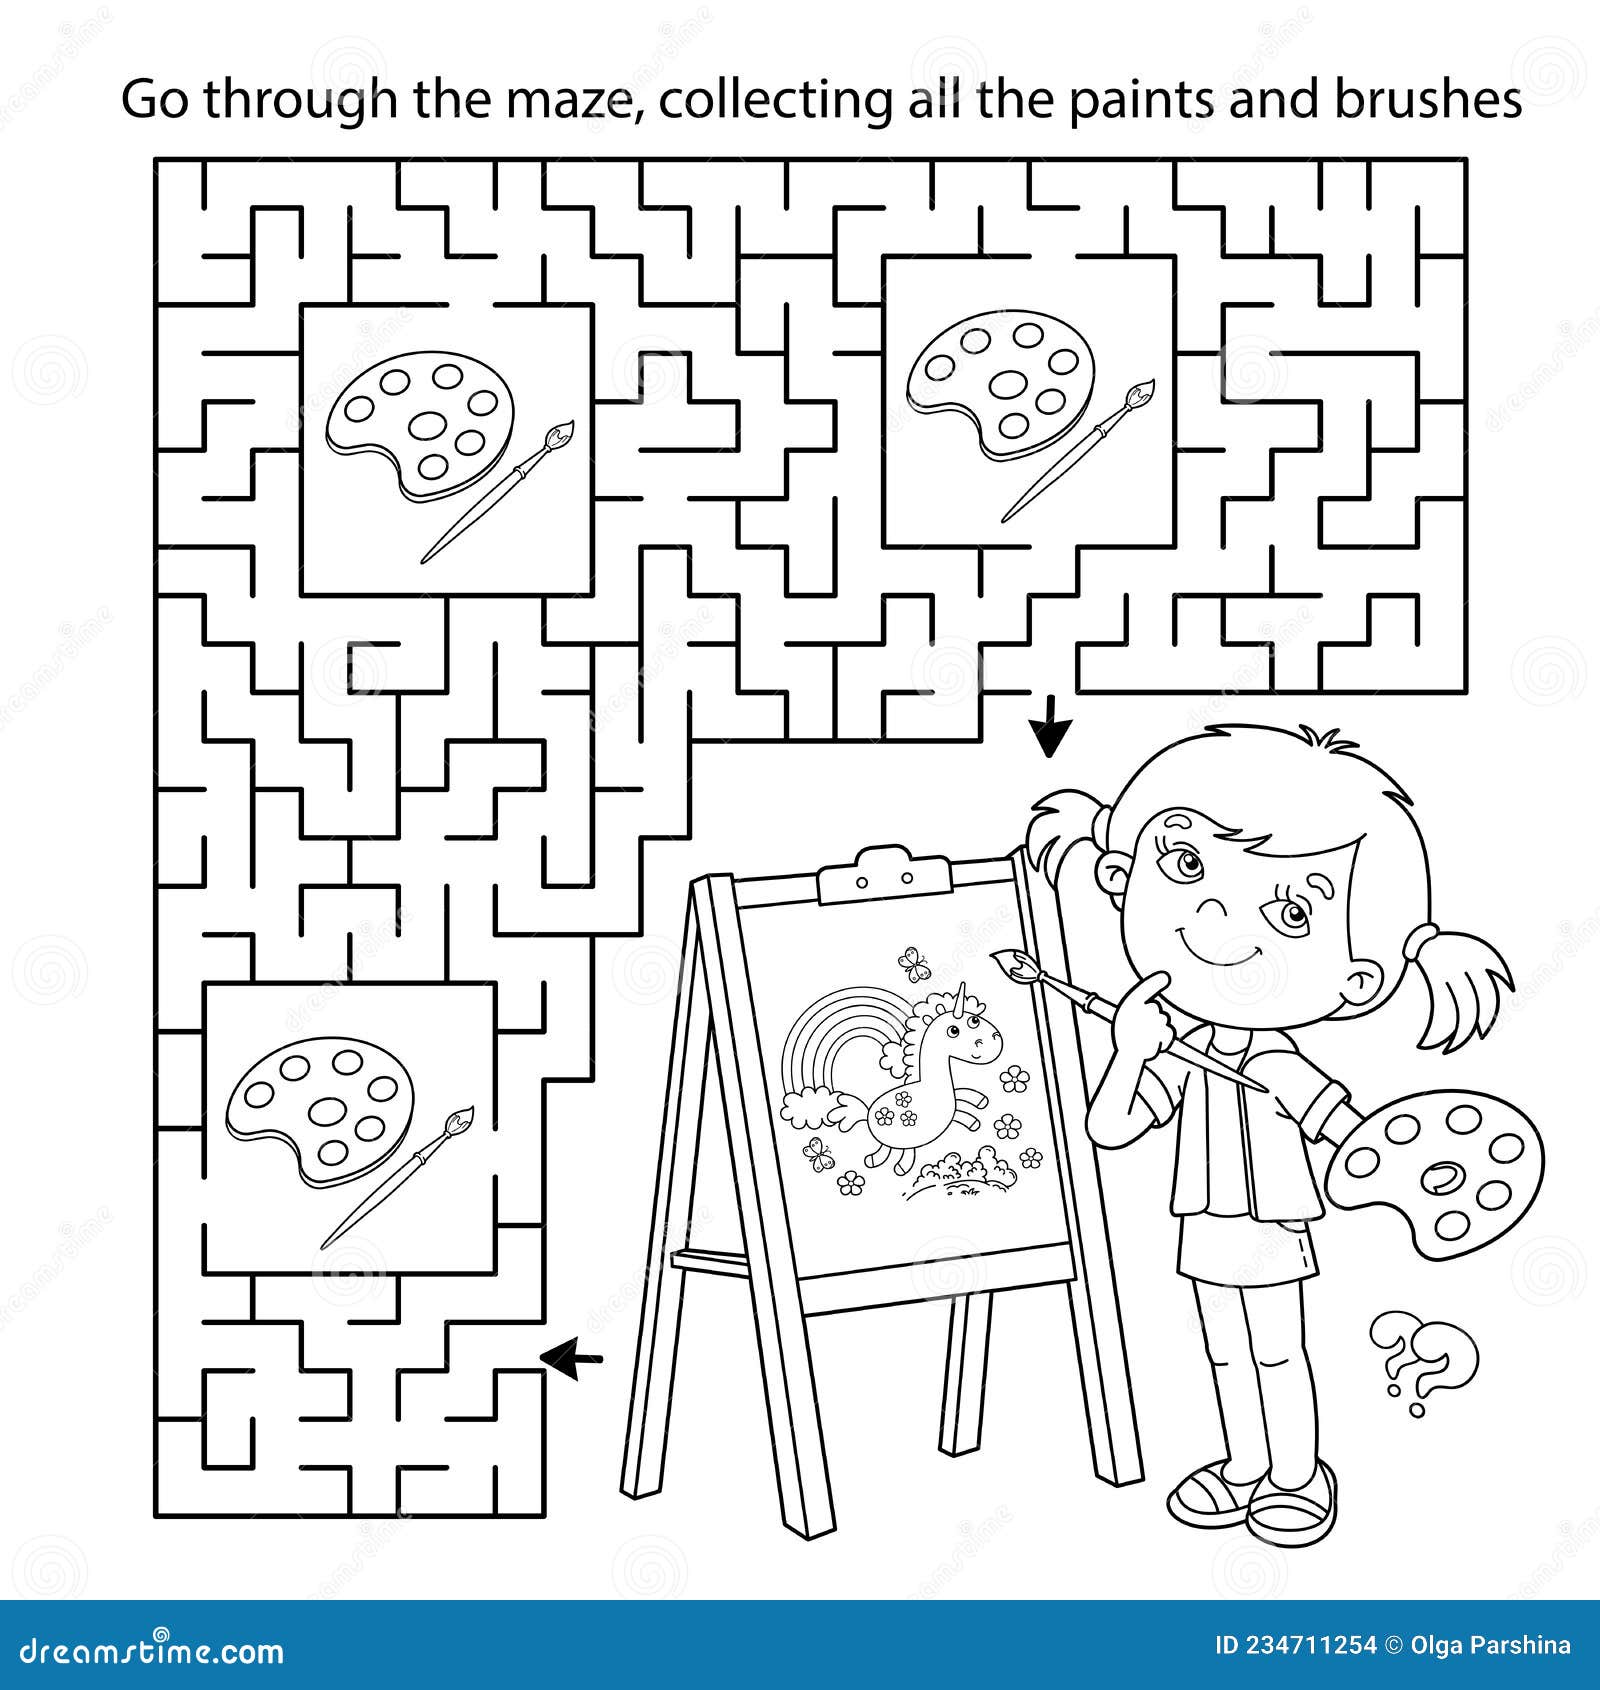 https://thumbs.dreamstime.com/z/maze-labyrinth-game-puzzle-coloring-page-outline-cartoon-girl-brush-paints-little-artist-easel-book-kids-234711254.jpg